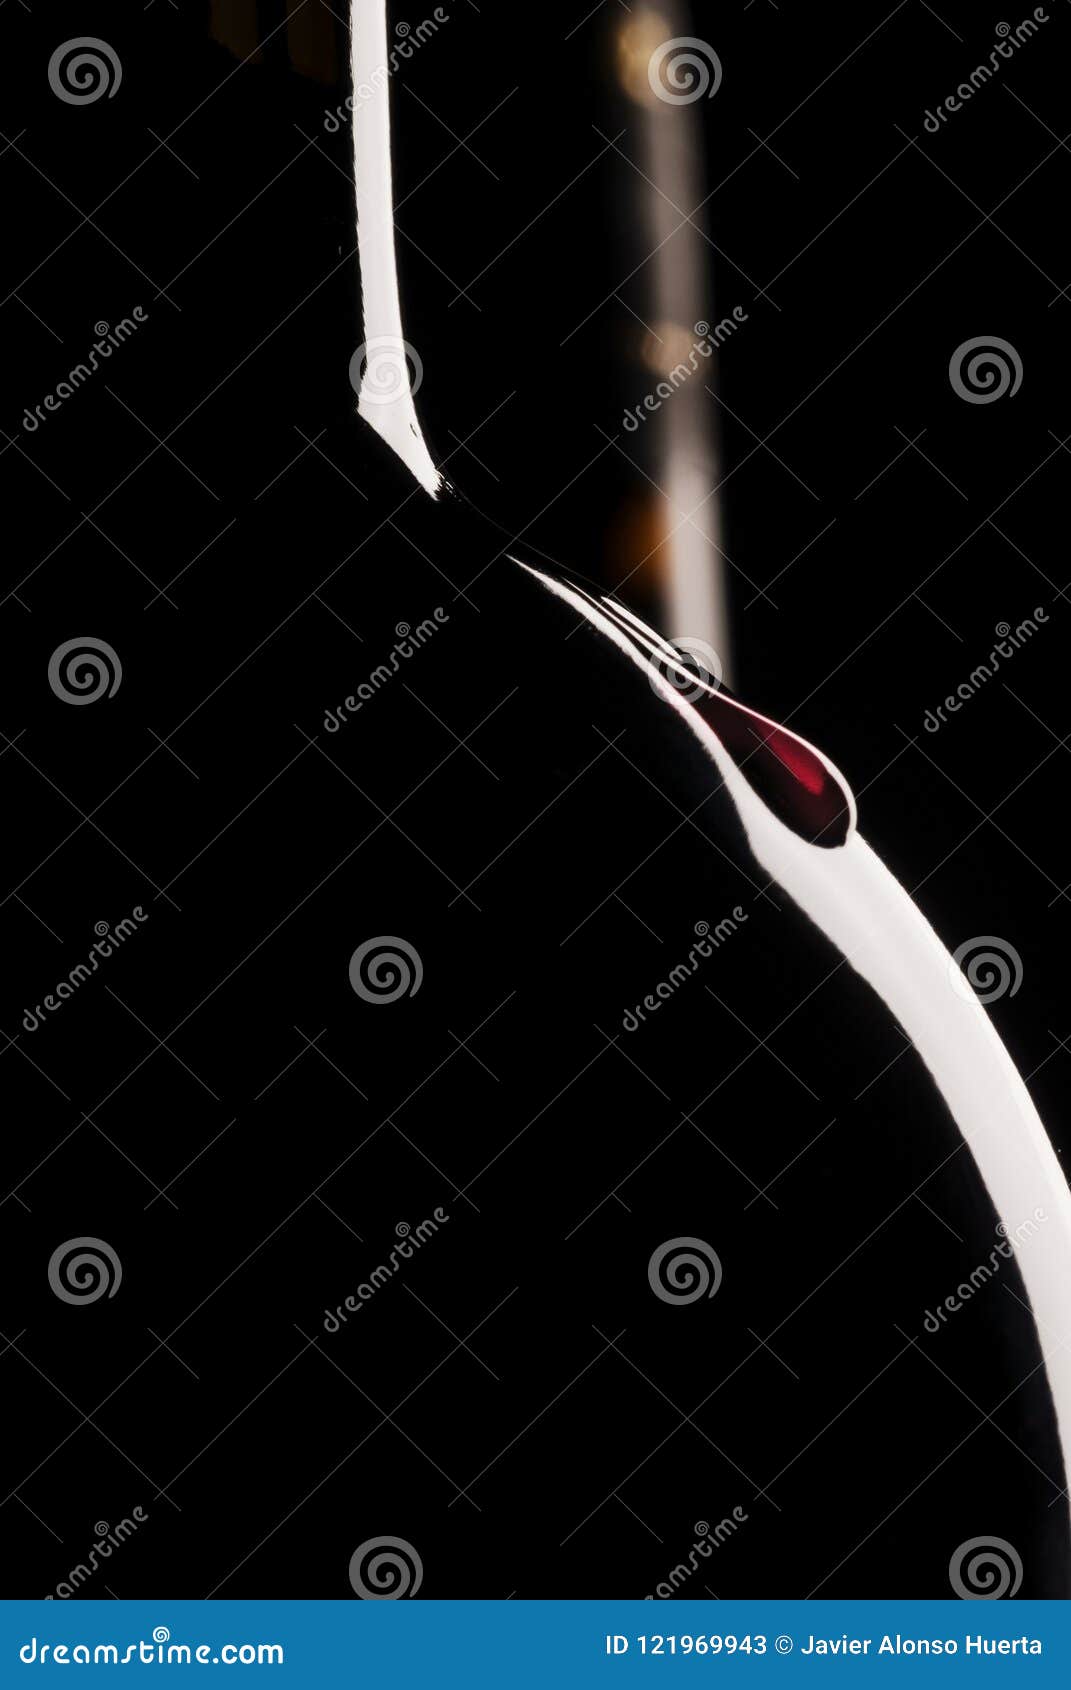 silhouette of wine bottle, black background, two bottles of wine, studio photography of bottle silhouettes